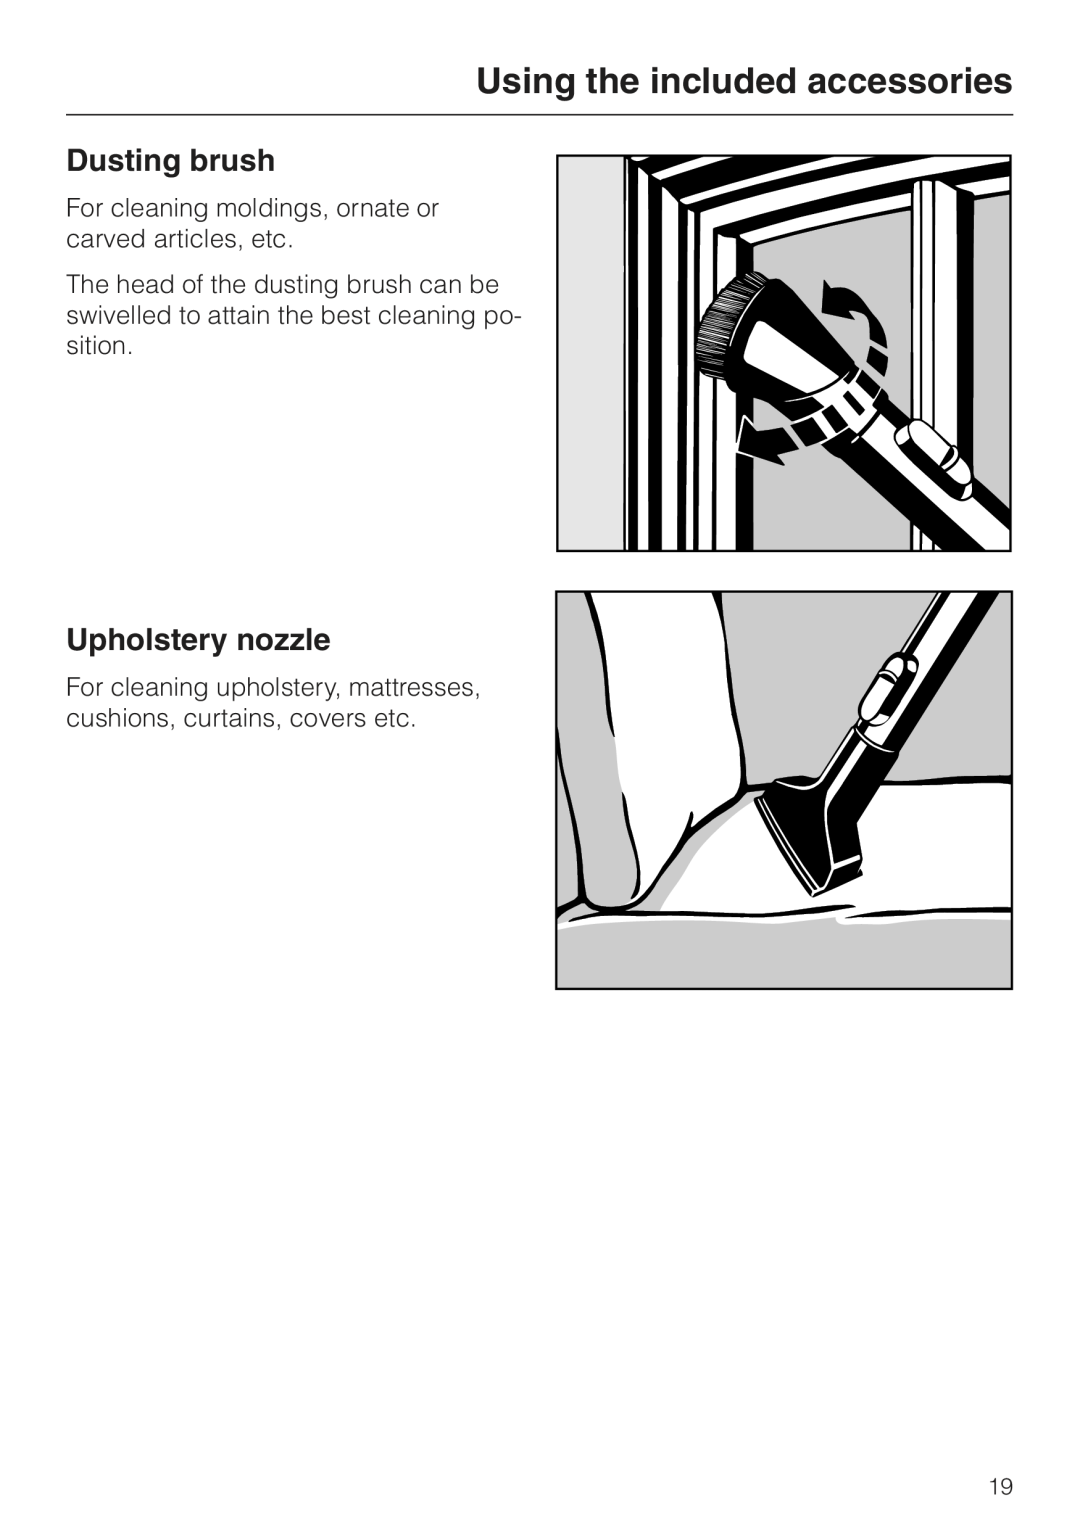 Miele S 600 - S 648, S 500 - S 548 manual Dusting brush, Upholstery nozzle, Using the included accessories 